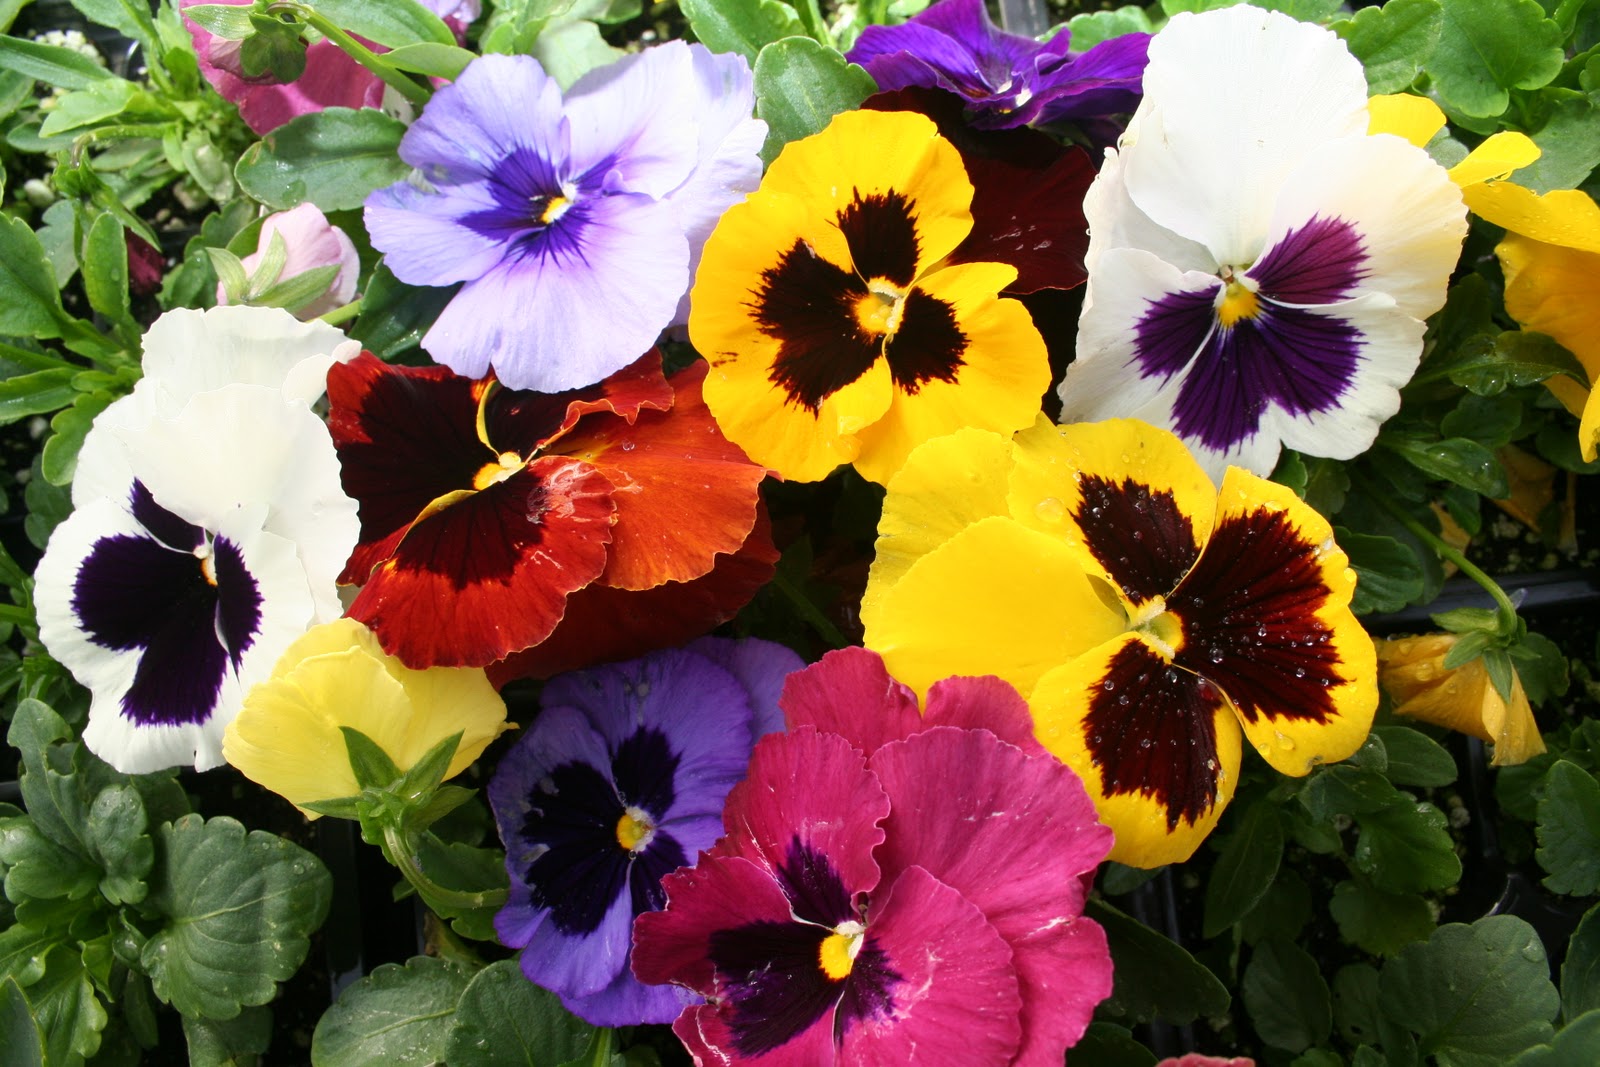 West Coast Gardens: Pansies and Violas are Vancouver’s Magic Winter Annual